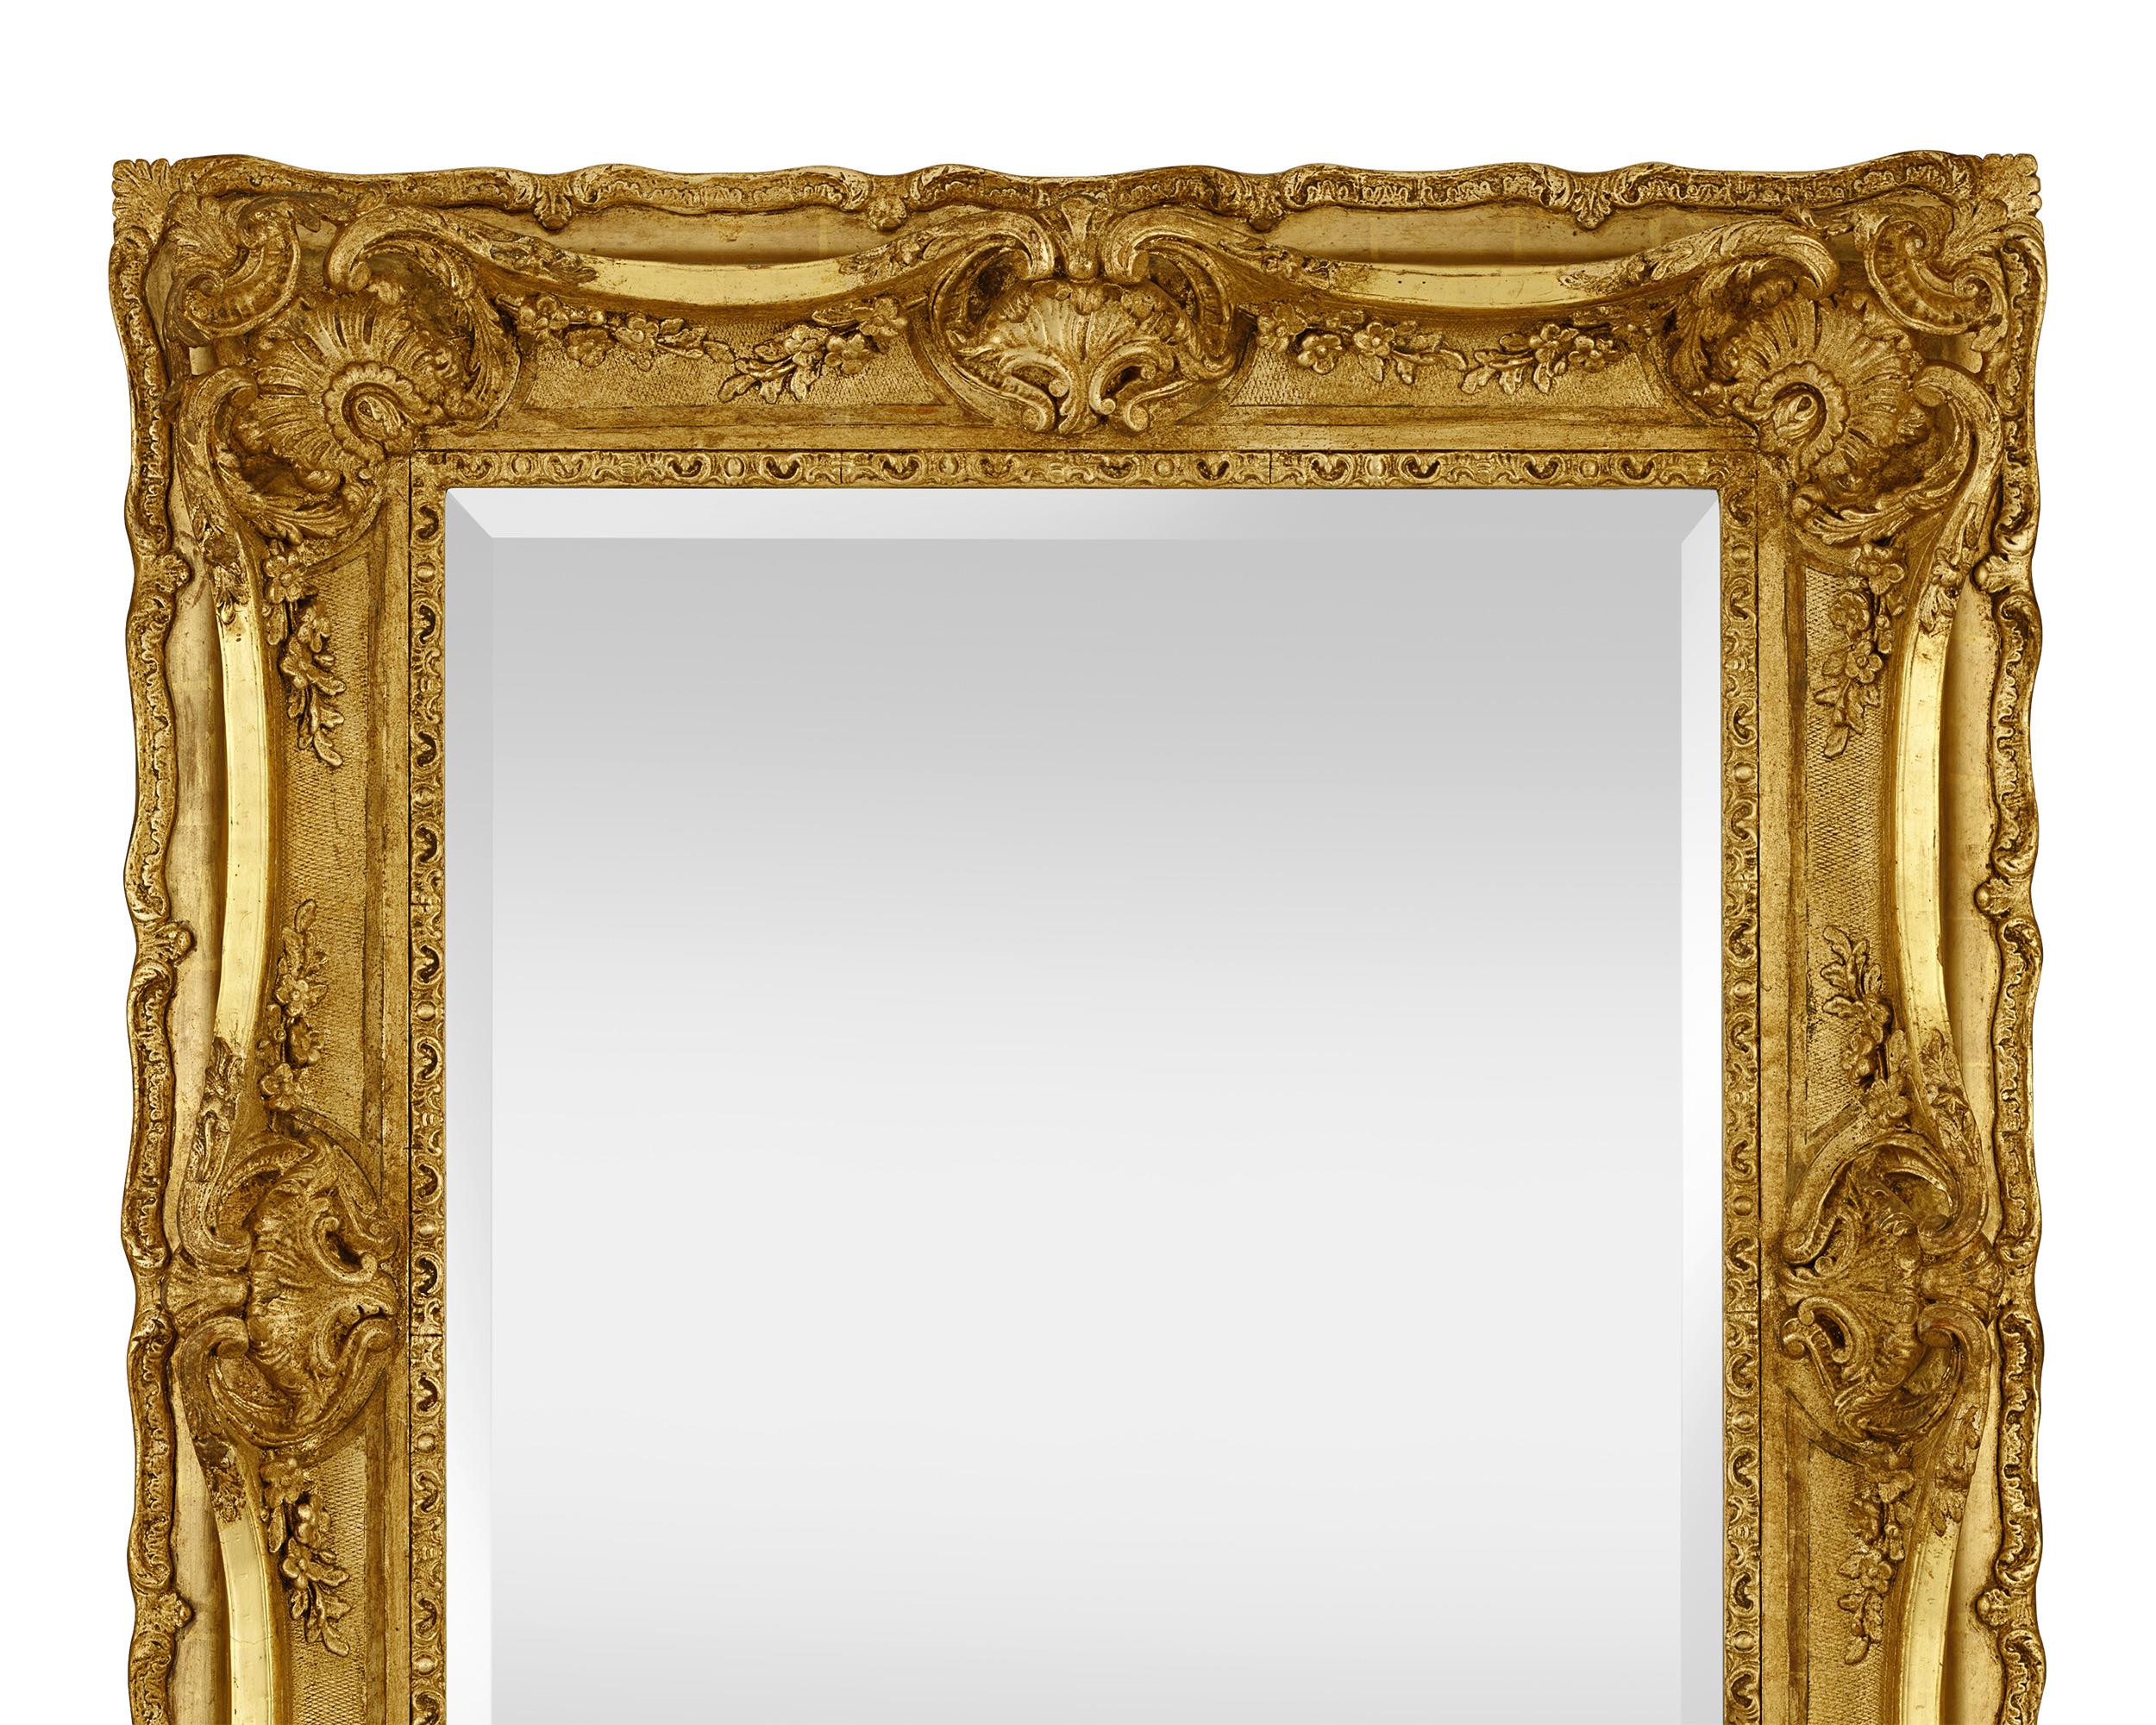 This beautiful mirror is ornately carved in the Louis XIV style. Period motifs including scrolls, shells and trailing foliage adorn the giltwood frame that surrounds the beveled glass mirror. Overall, its intricate craftsmanship, large size and